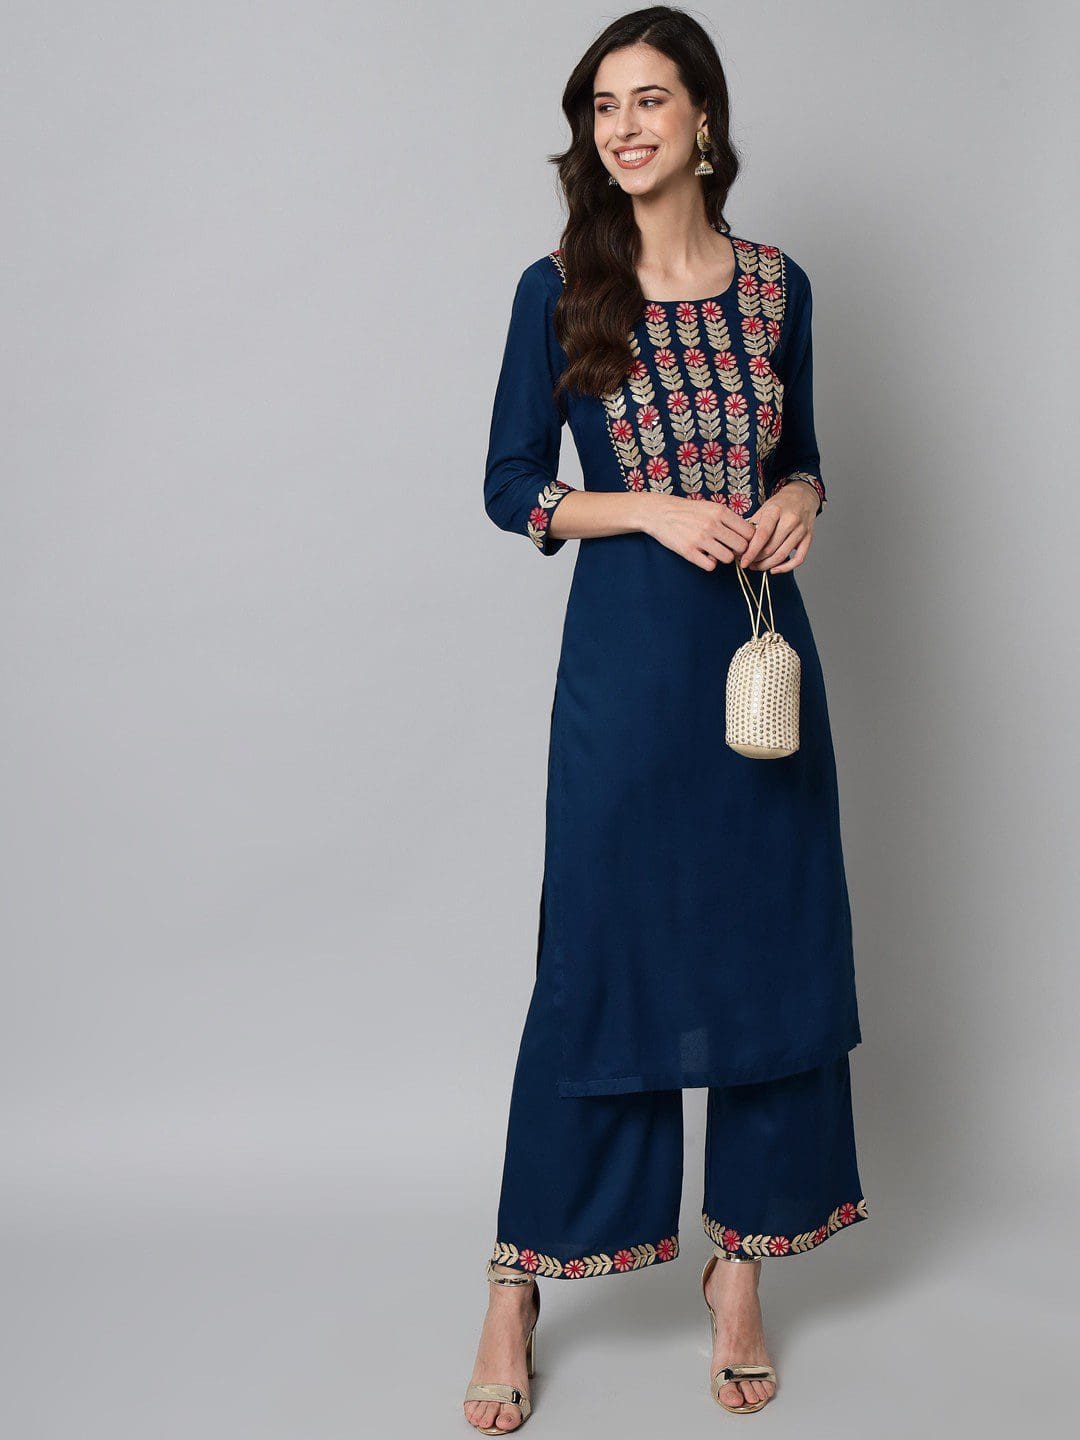 Exclusive Rayon Embroidery Kurta Teal Blue Color With Palazzo For Women.